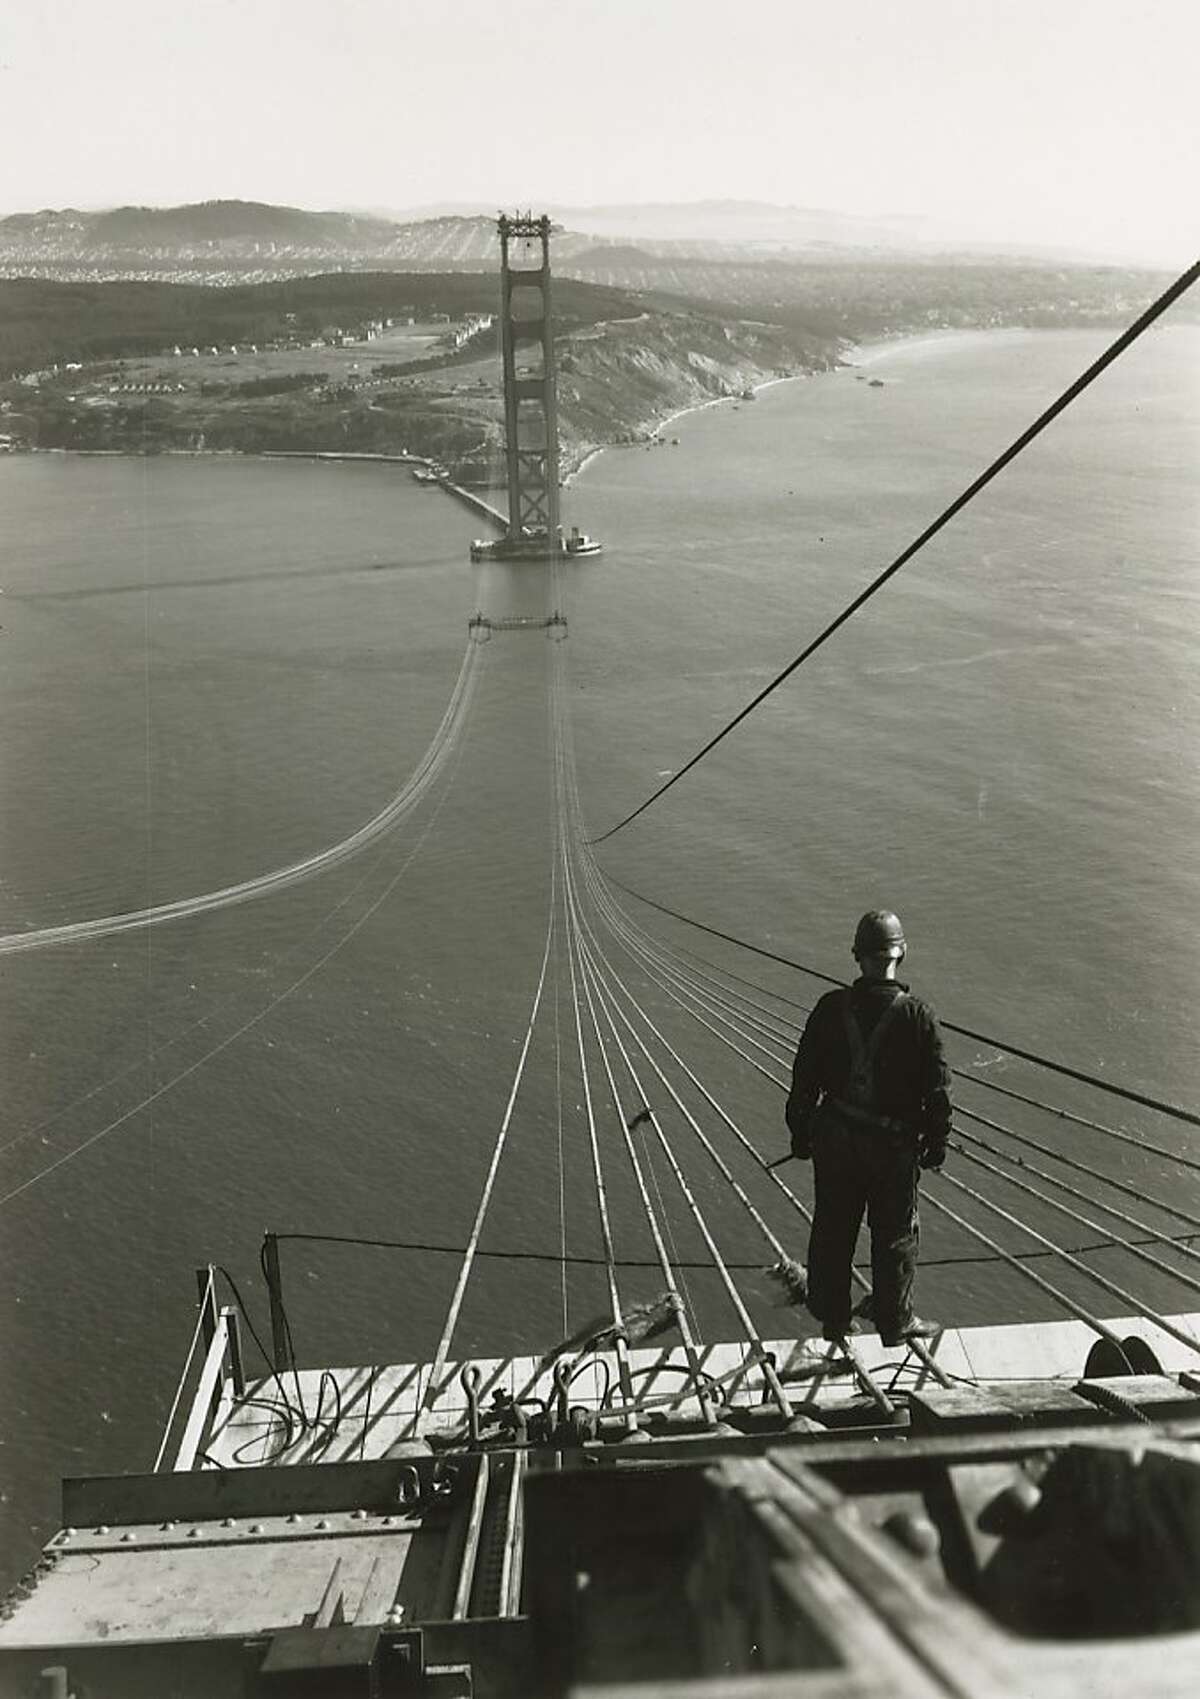 1936 - A bridge worker looks across to the San Francisco tower as cables are spun for the Golden Gate Bridge.